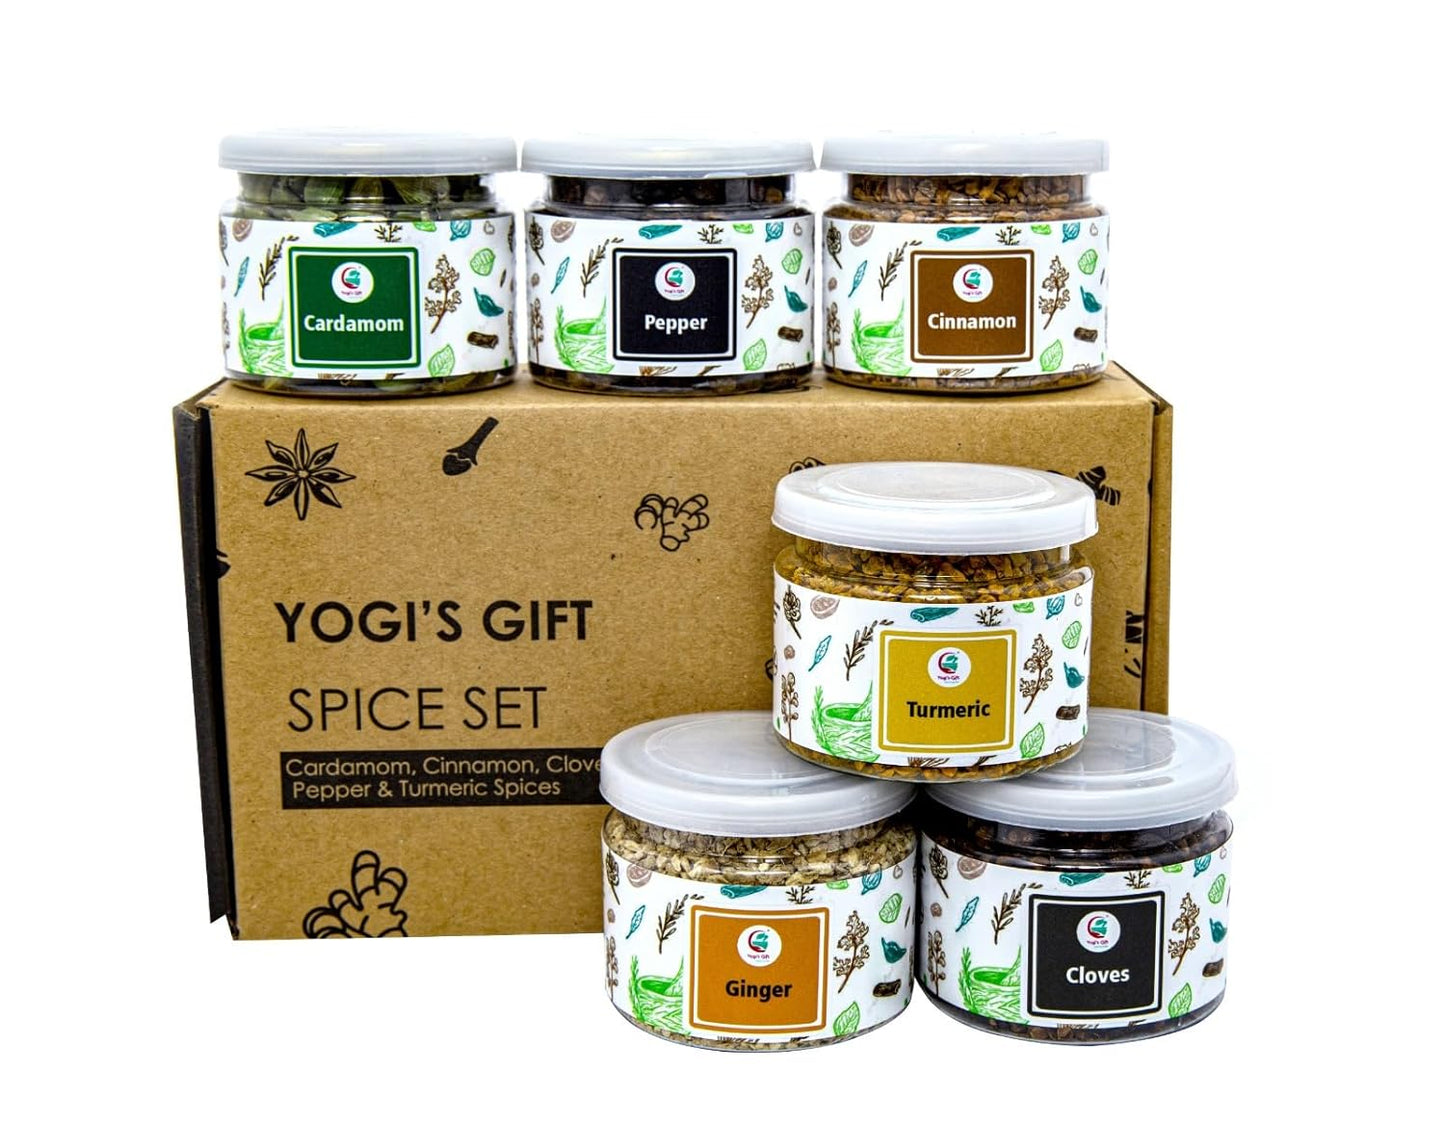 Spice Set (6 Essential Spices) | Cardamom, Cinnamon, Cloves, Ginger, Pepper, Turmeric | Perfect Spice Gift Set | By Yogi's Gift®